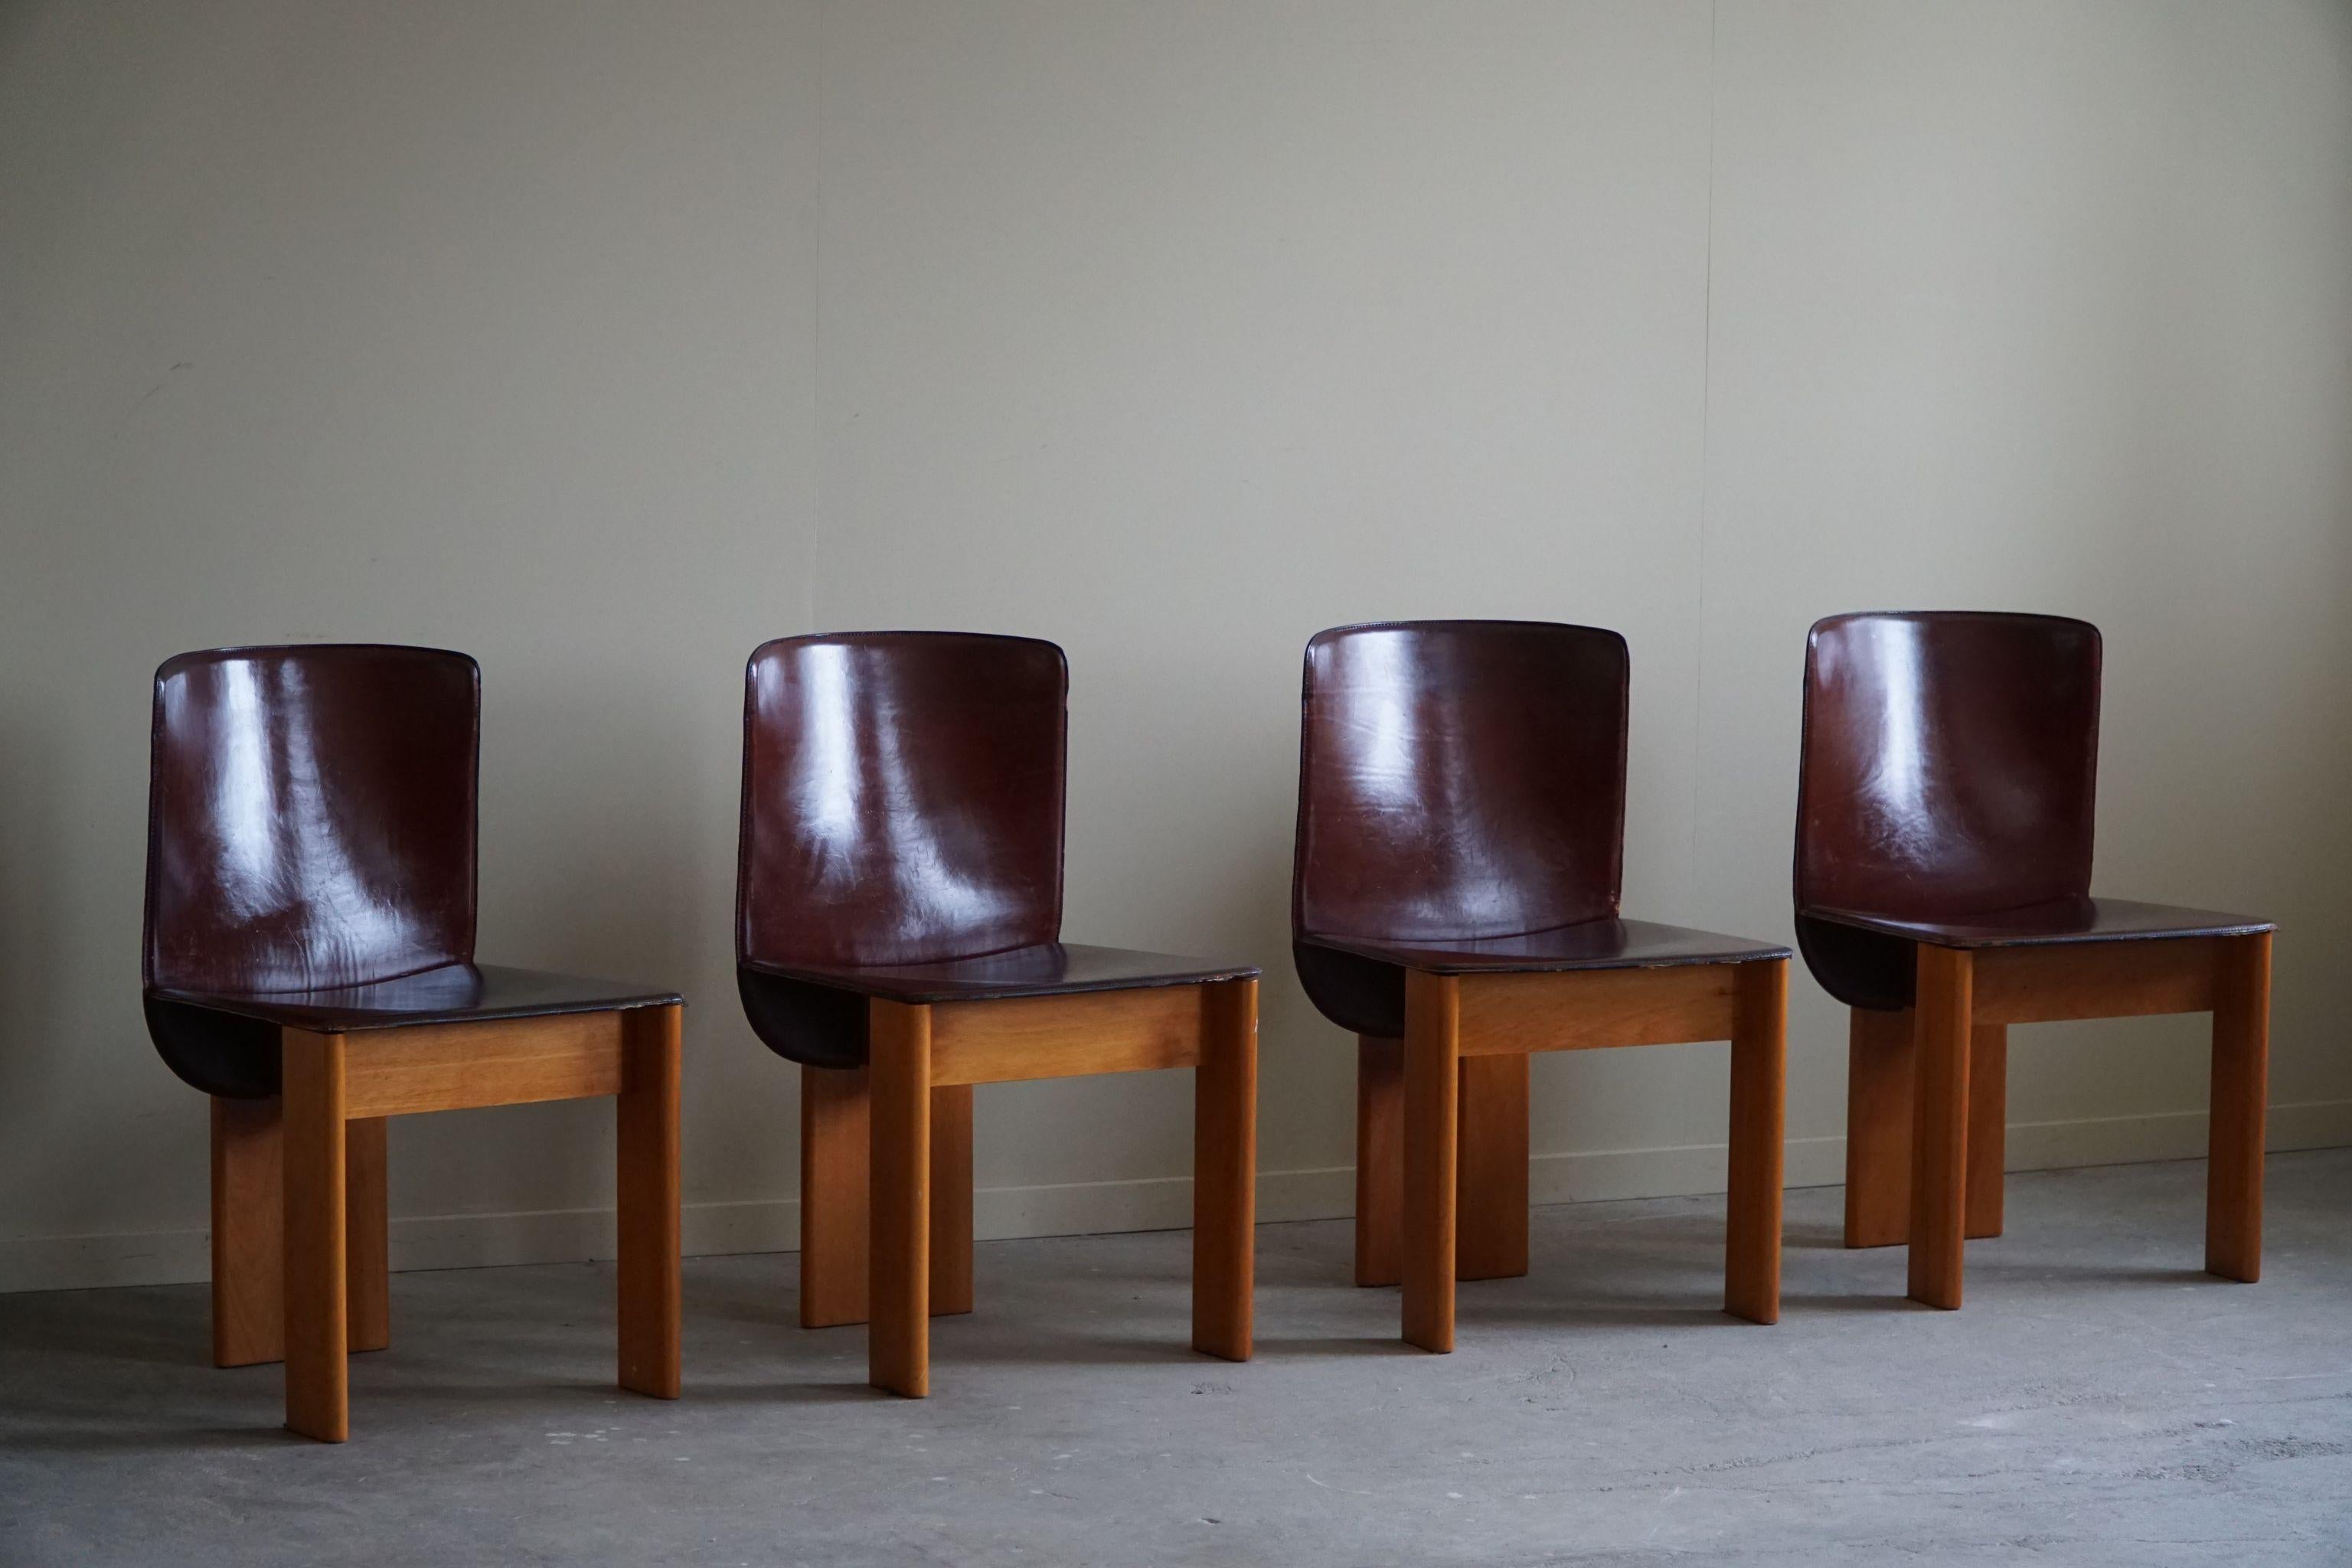 Italian Mid Century Modern, Set of 4 Leather Chairs, Tobia Scarpa Style, 1960s In Good Condition For Sale In Odense, DK